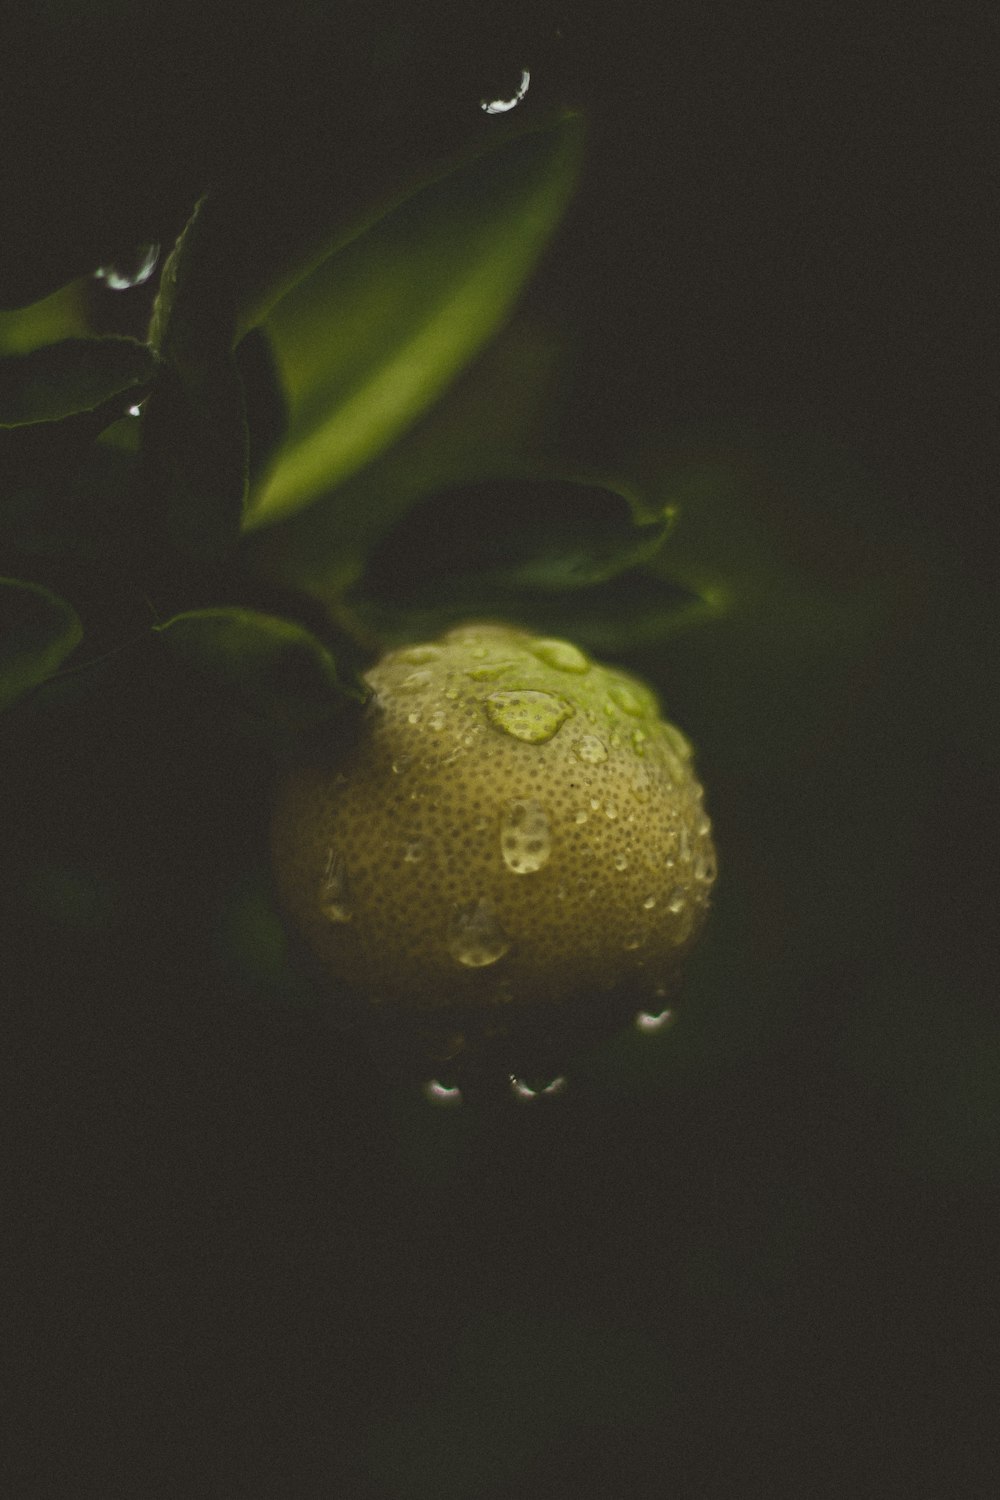 water droplets on yellow fruit